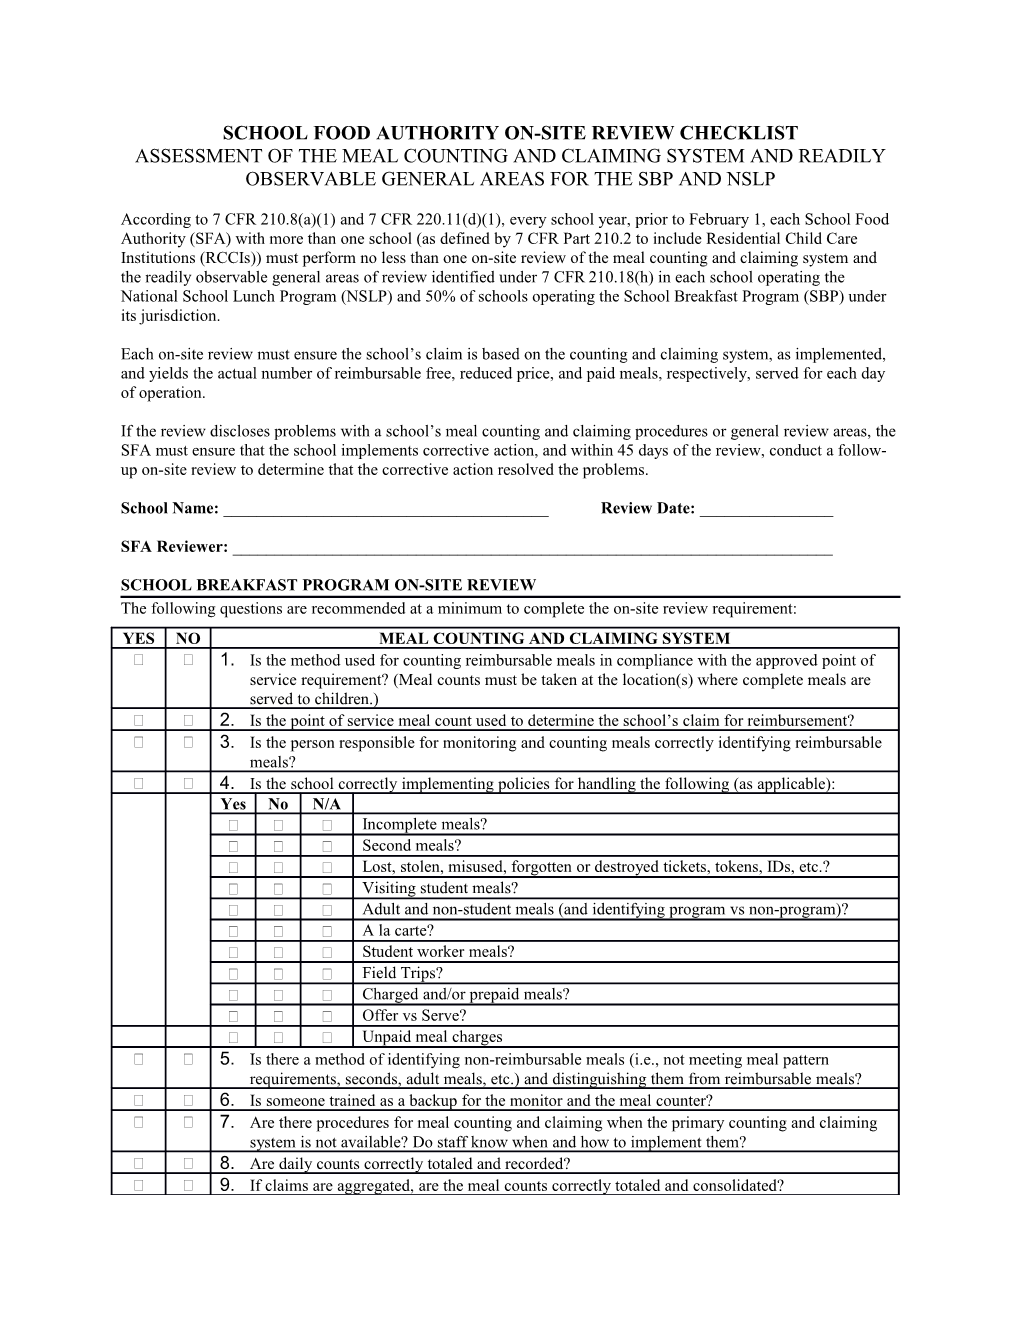 School Food Authority On-Site Review Checklist